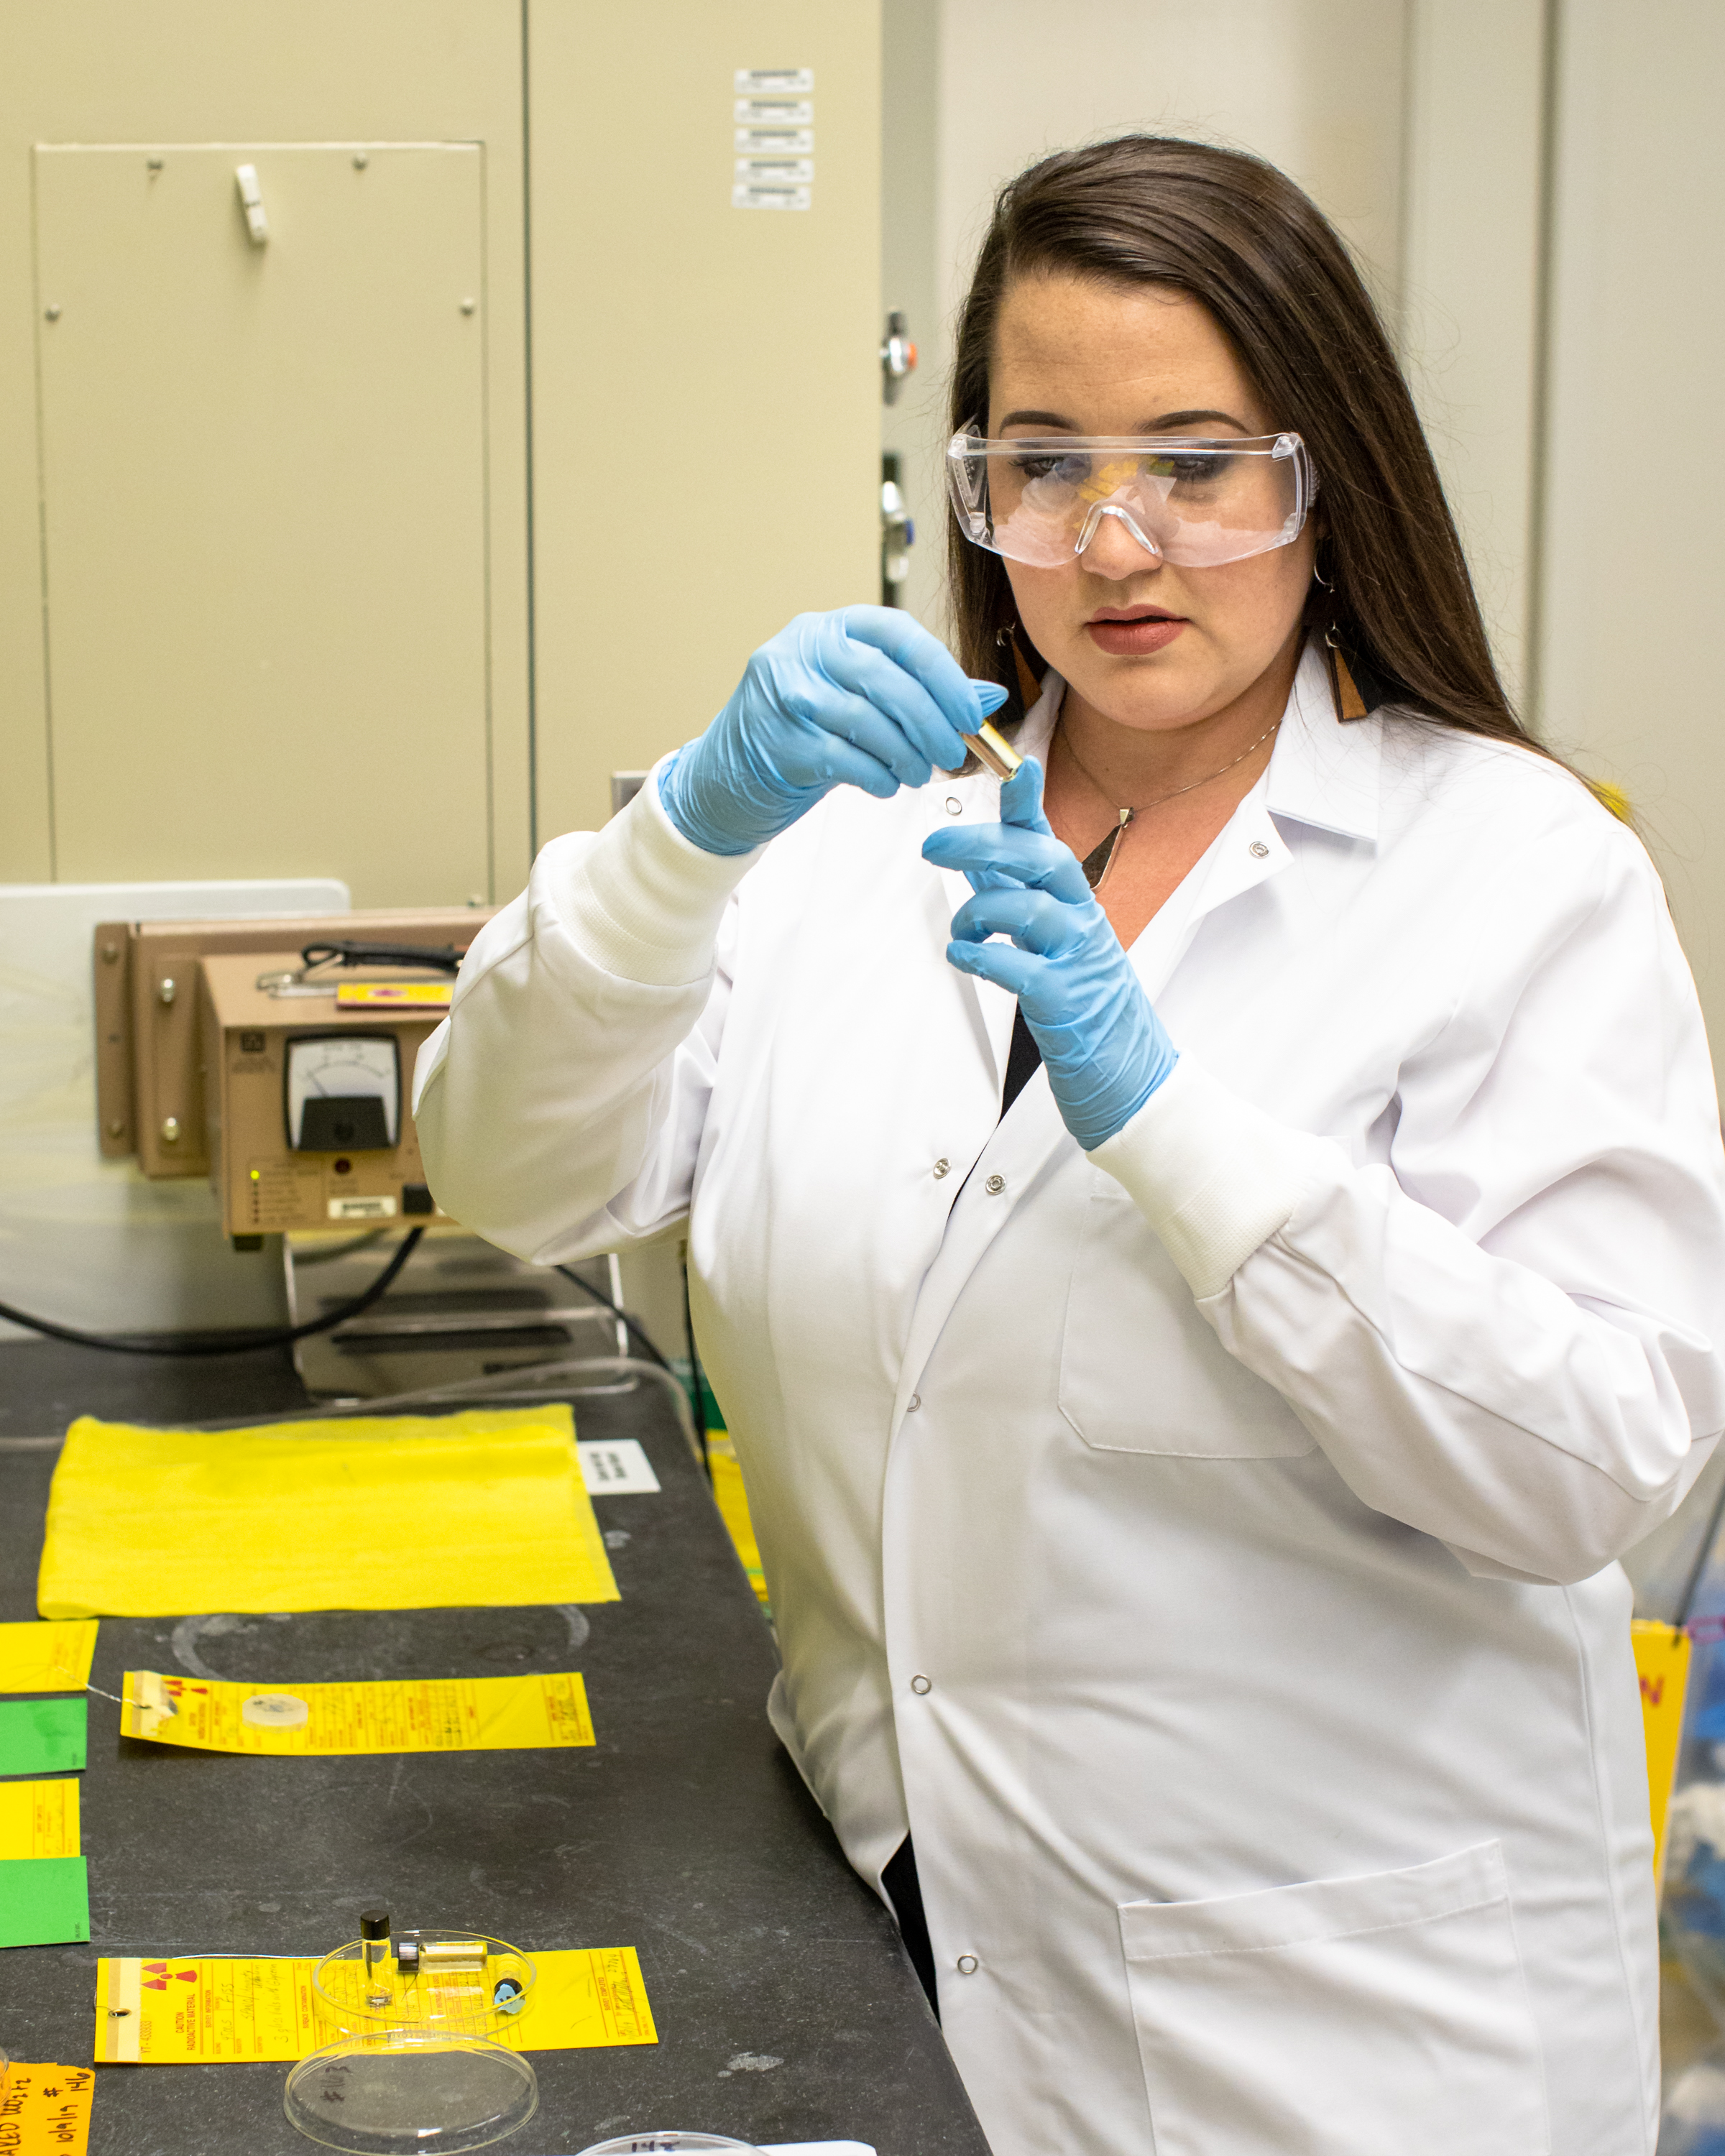 ORNL’s Tyler Spano examines a sample of uranyl nitrate solution that she uses as a precursor to many uranium oxide syntheses. Credit: Carlos Jones/ORNL, U.S. Dept. of Energy